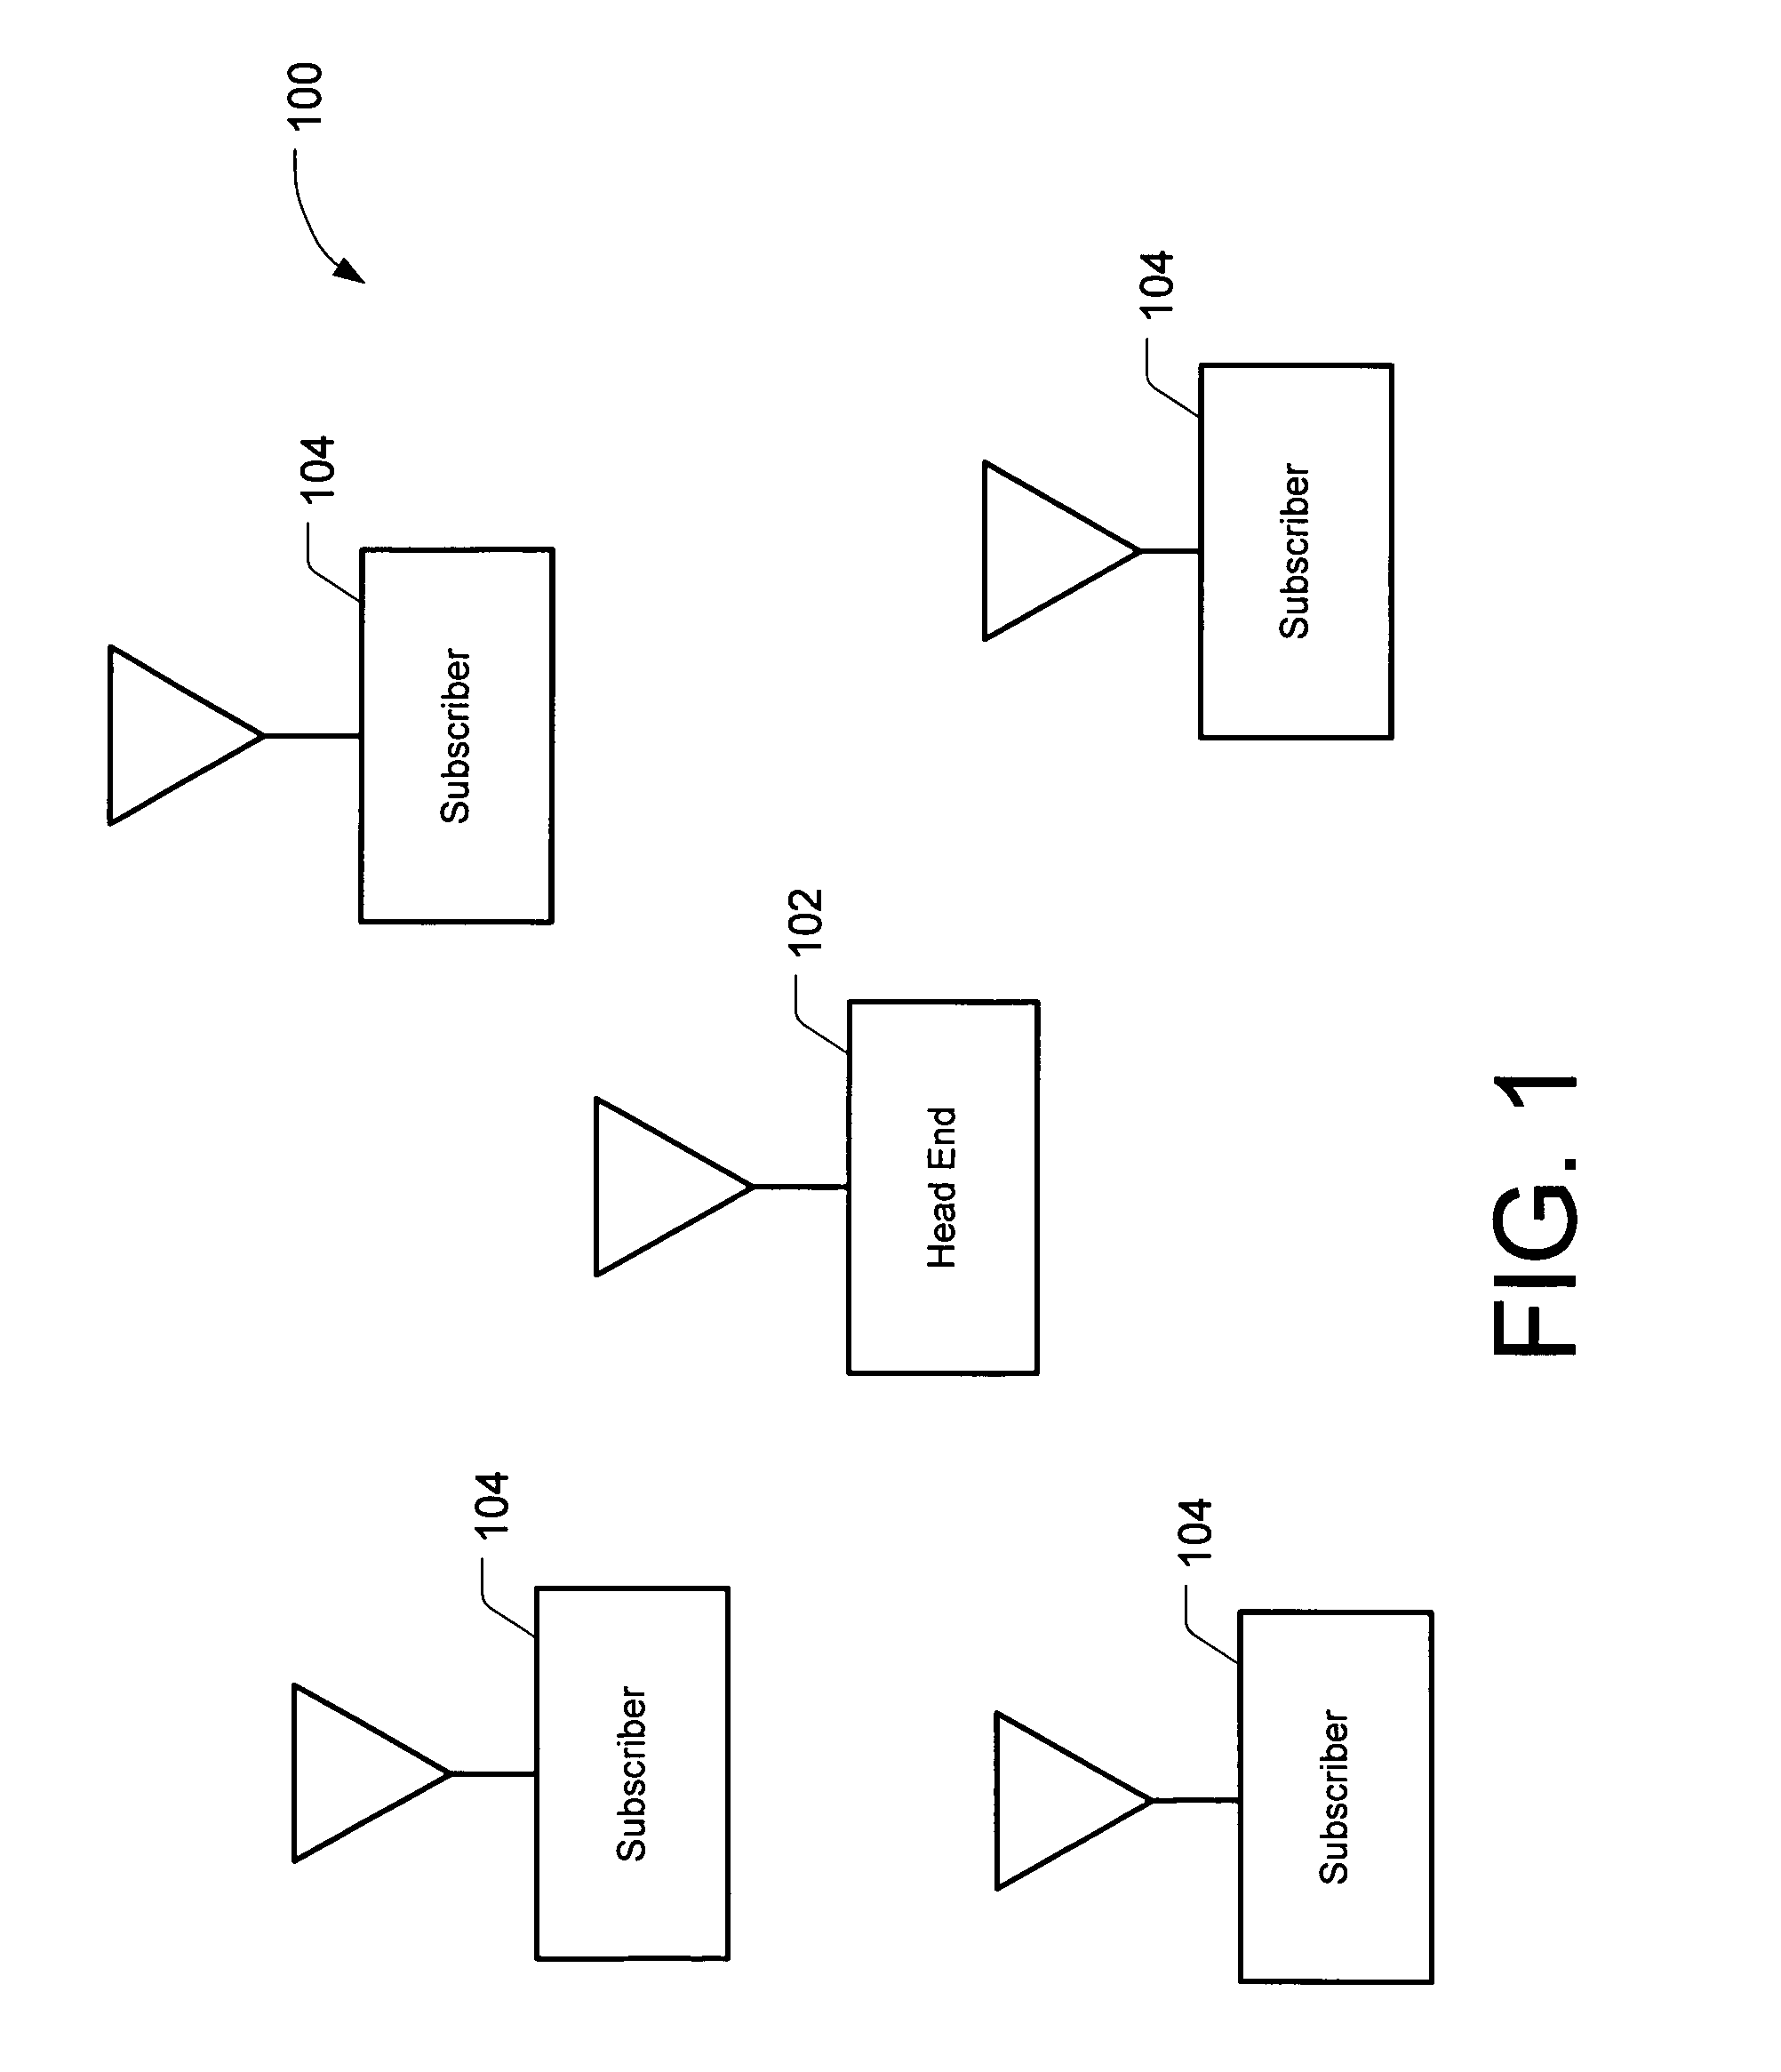 Interference mitigation in a wireless communication system